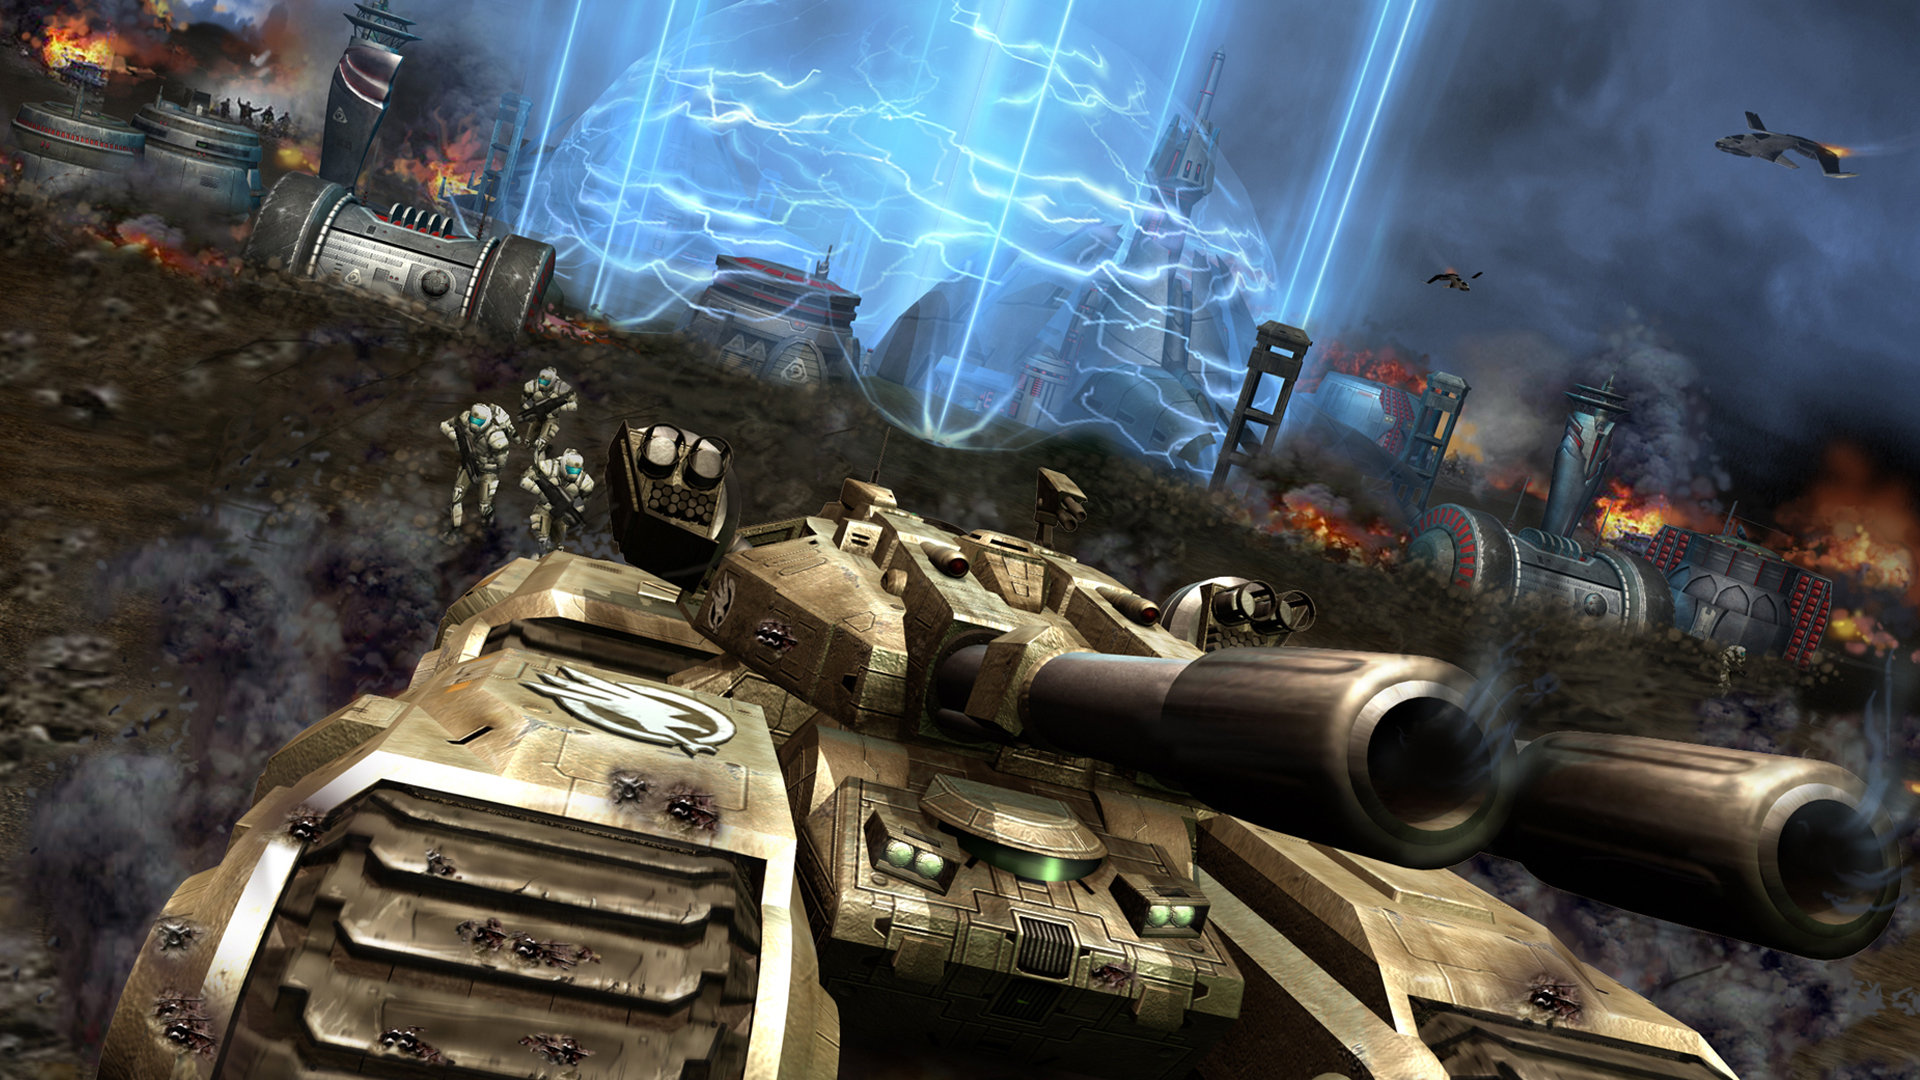 Command And Conquer Wallpapers Hd For Desktop Backgrounds Images, Photos, Reviews